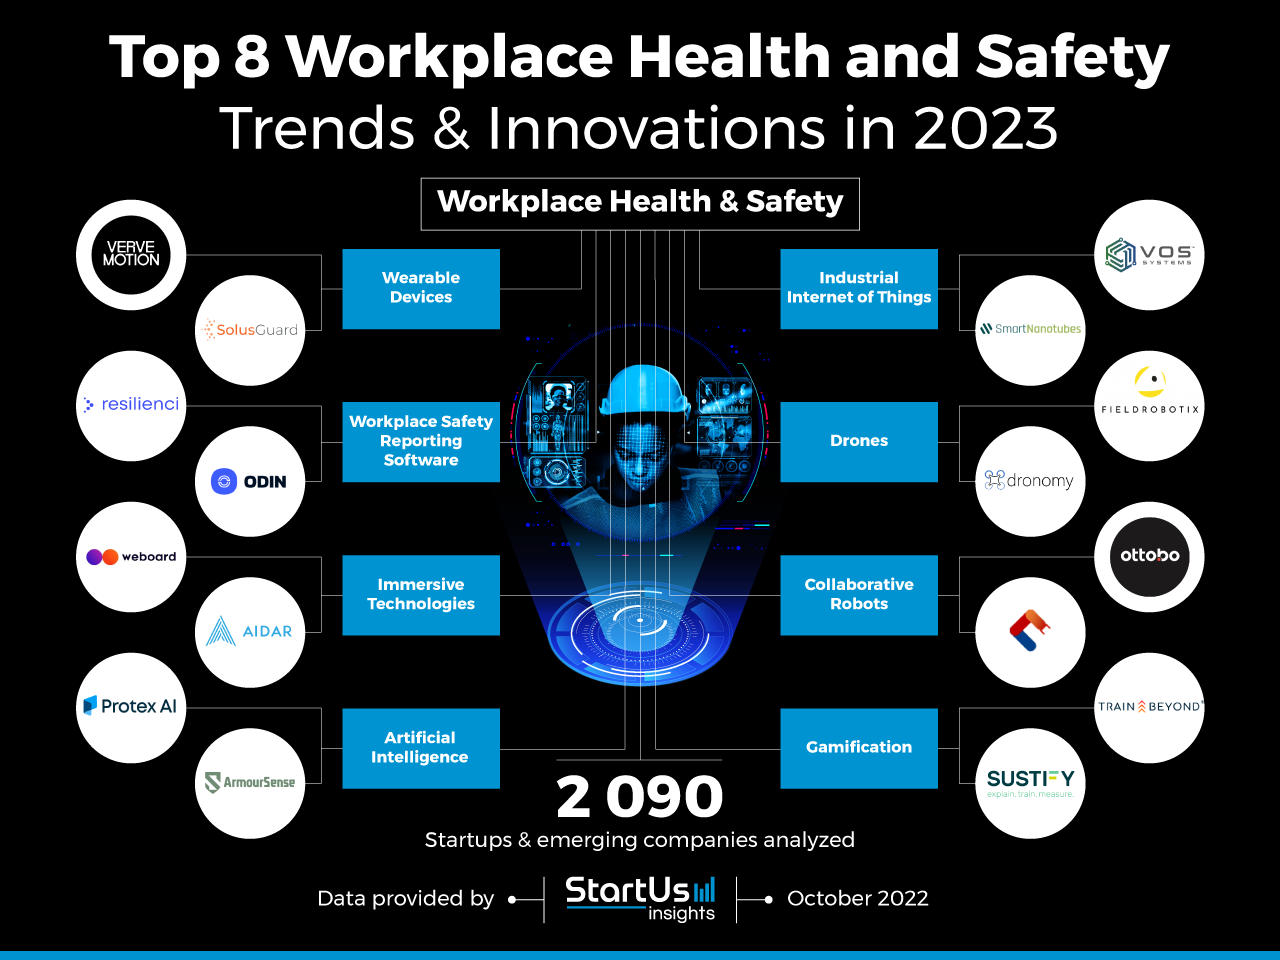 Top 8 Workplace Health and Safety Trends & Innovations in 2023